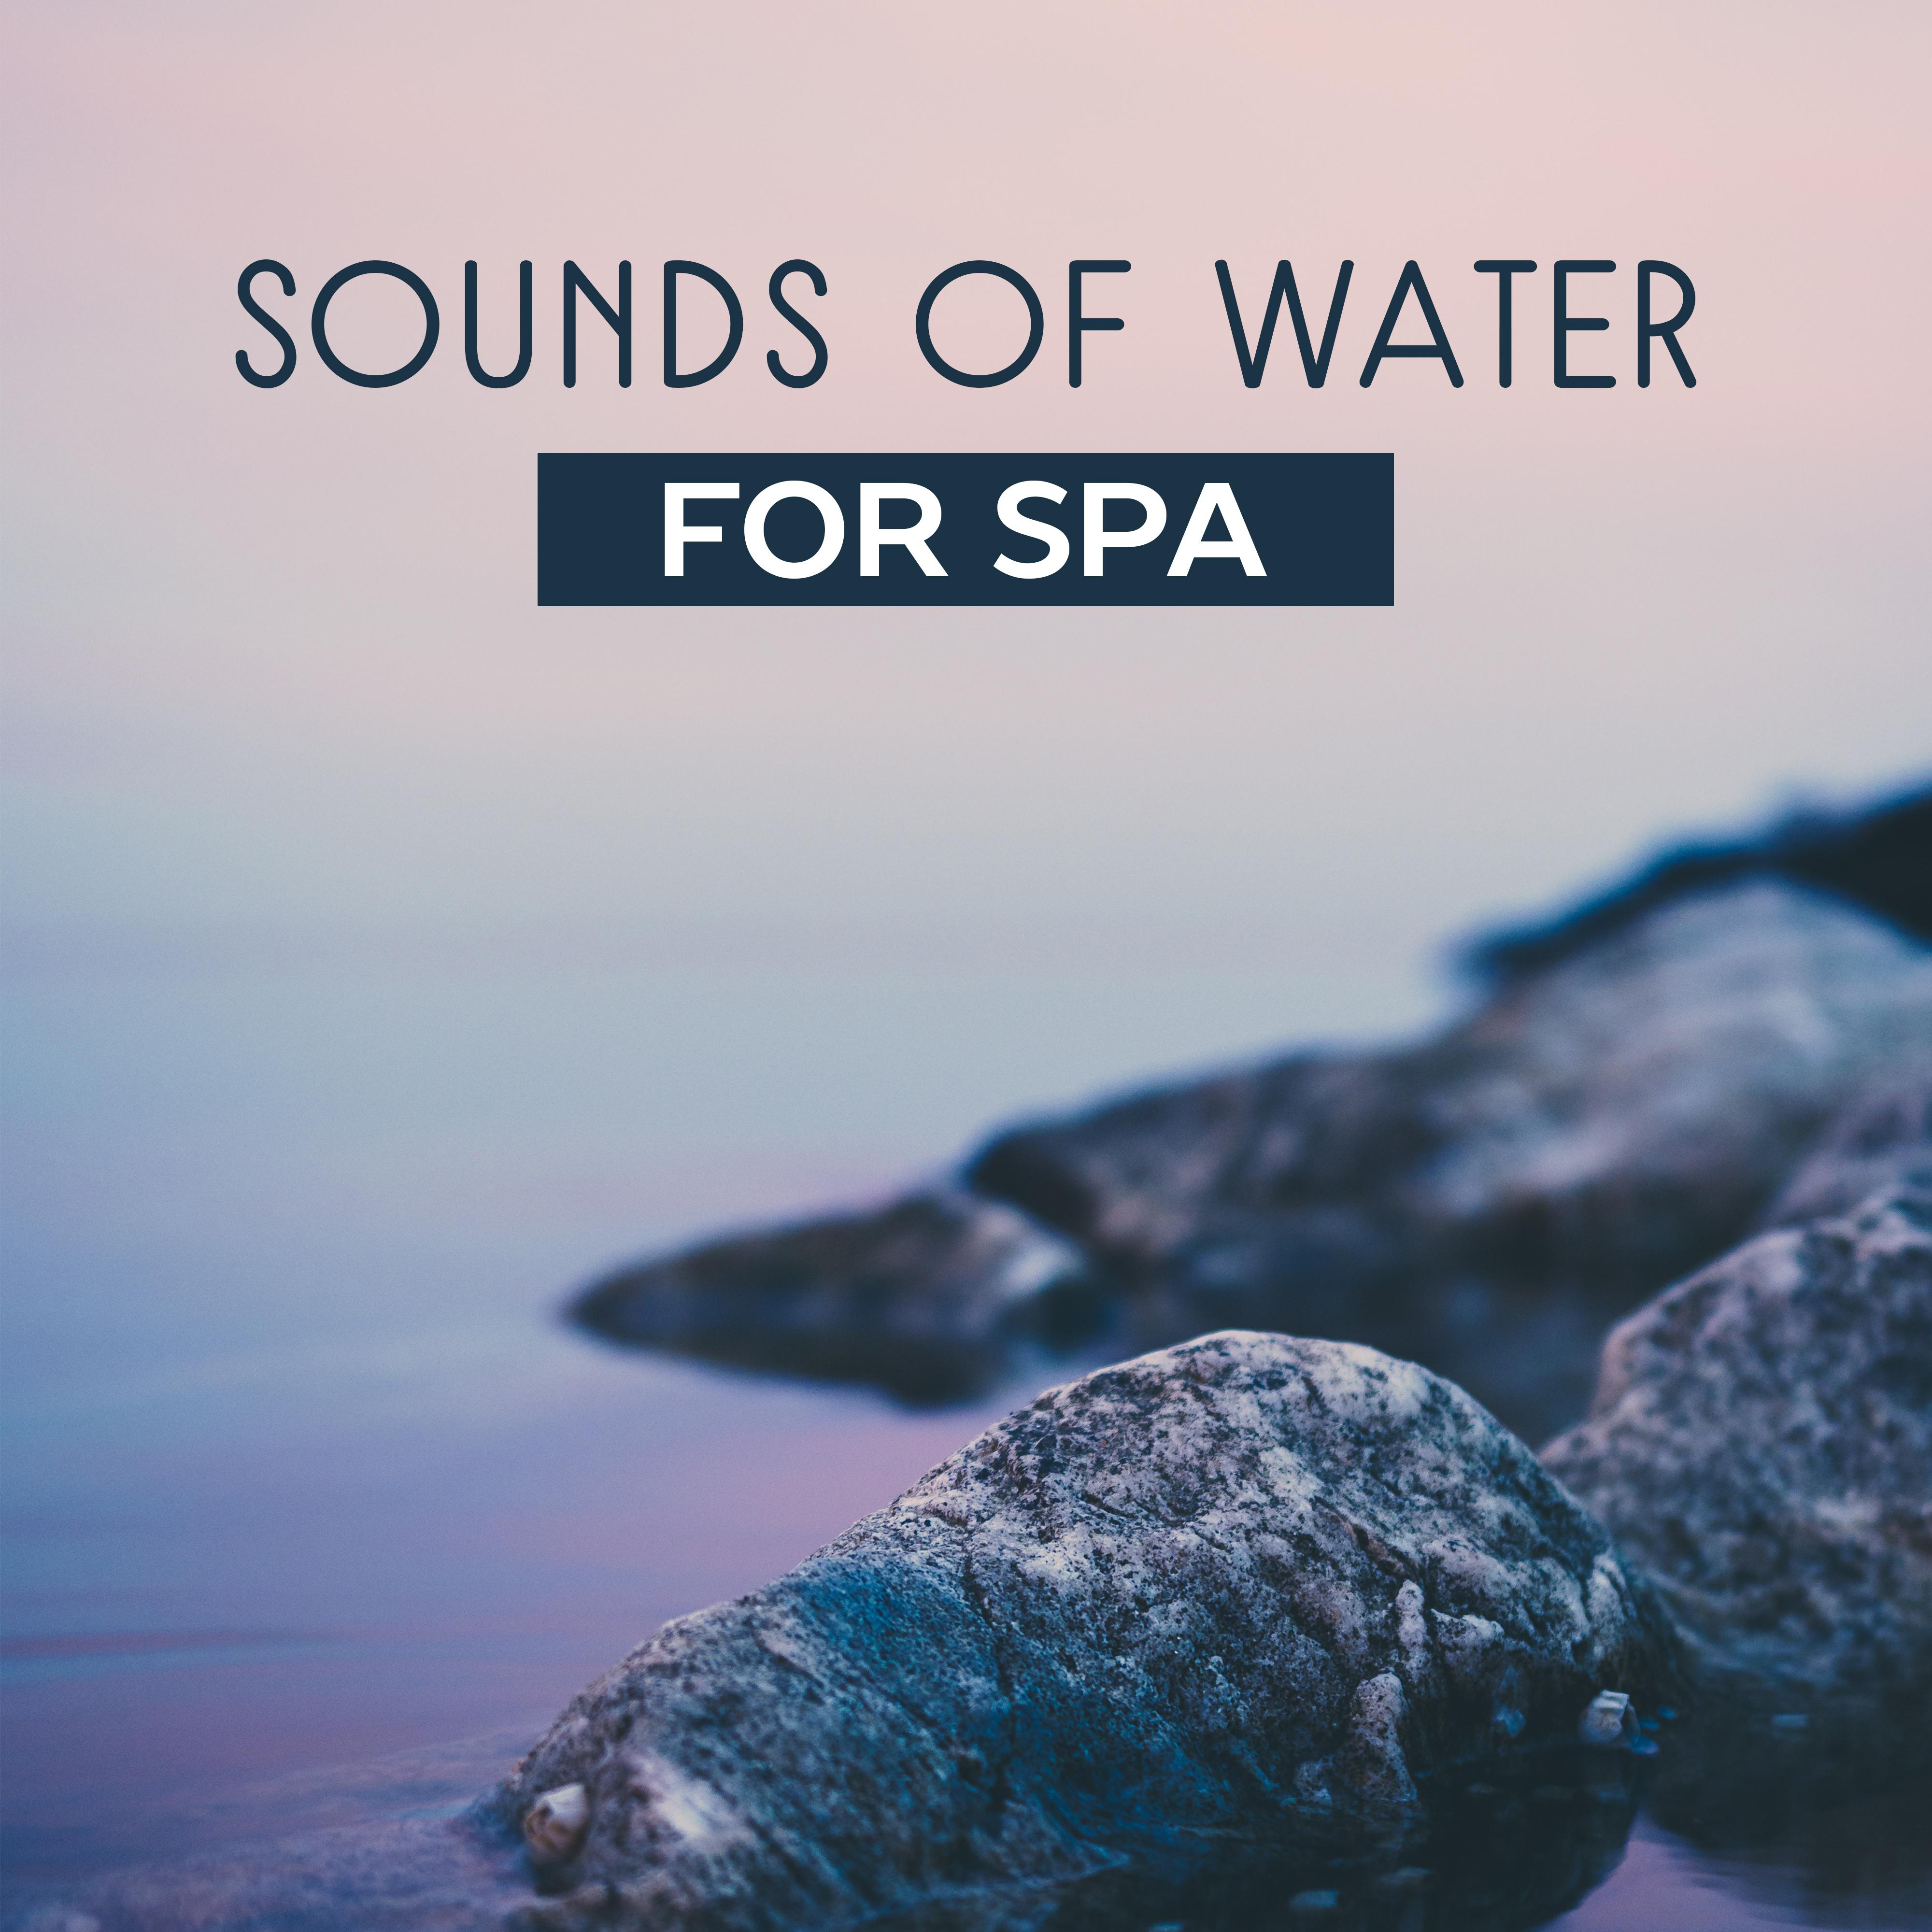 Sounds of Water for Spa